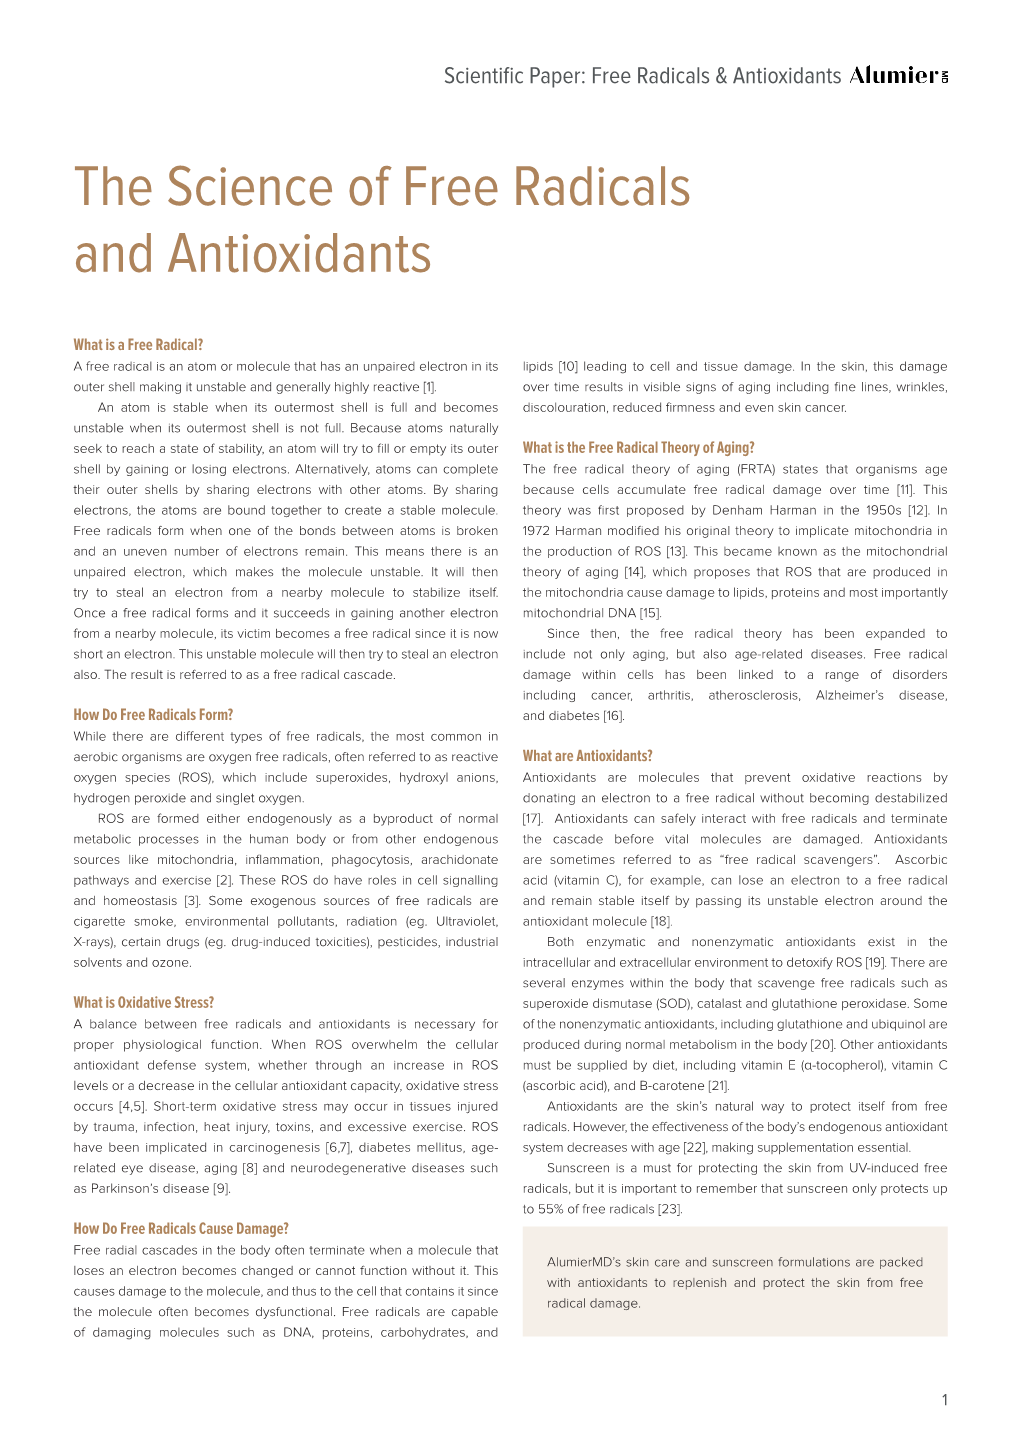 The Science of Free Radicals and Antioxidants